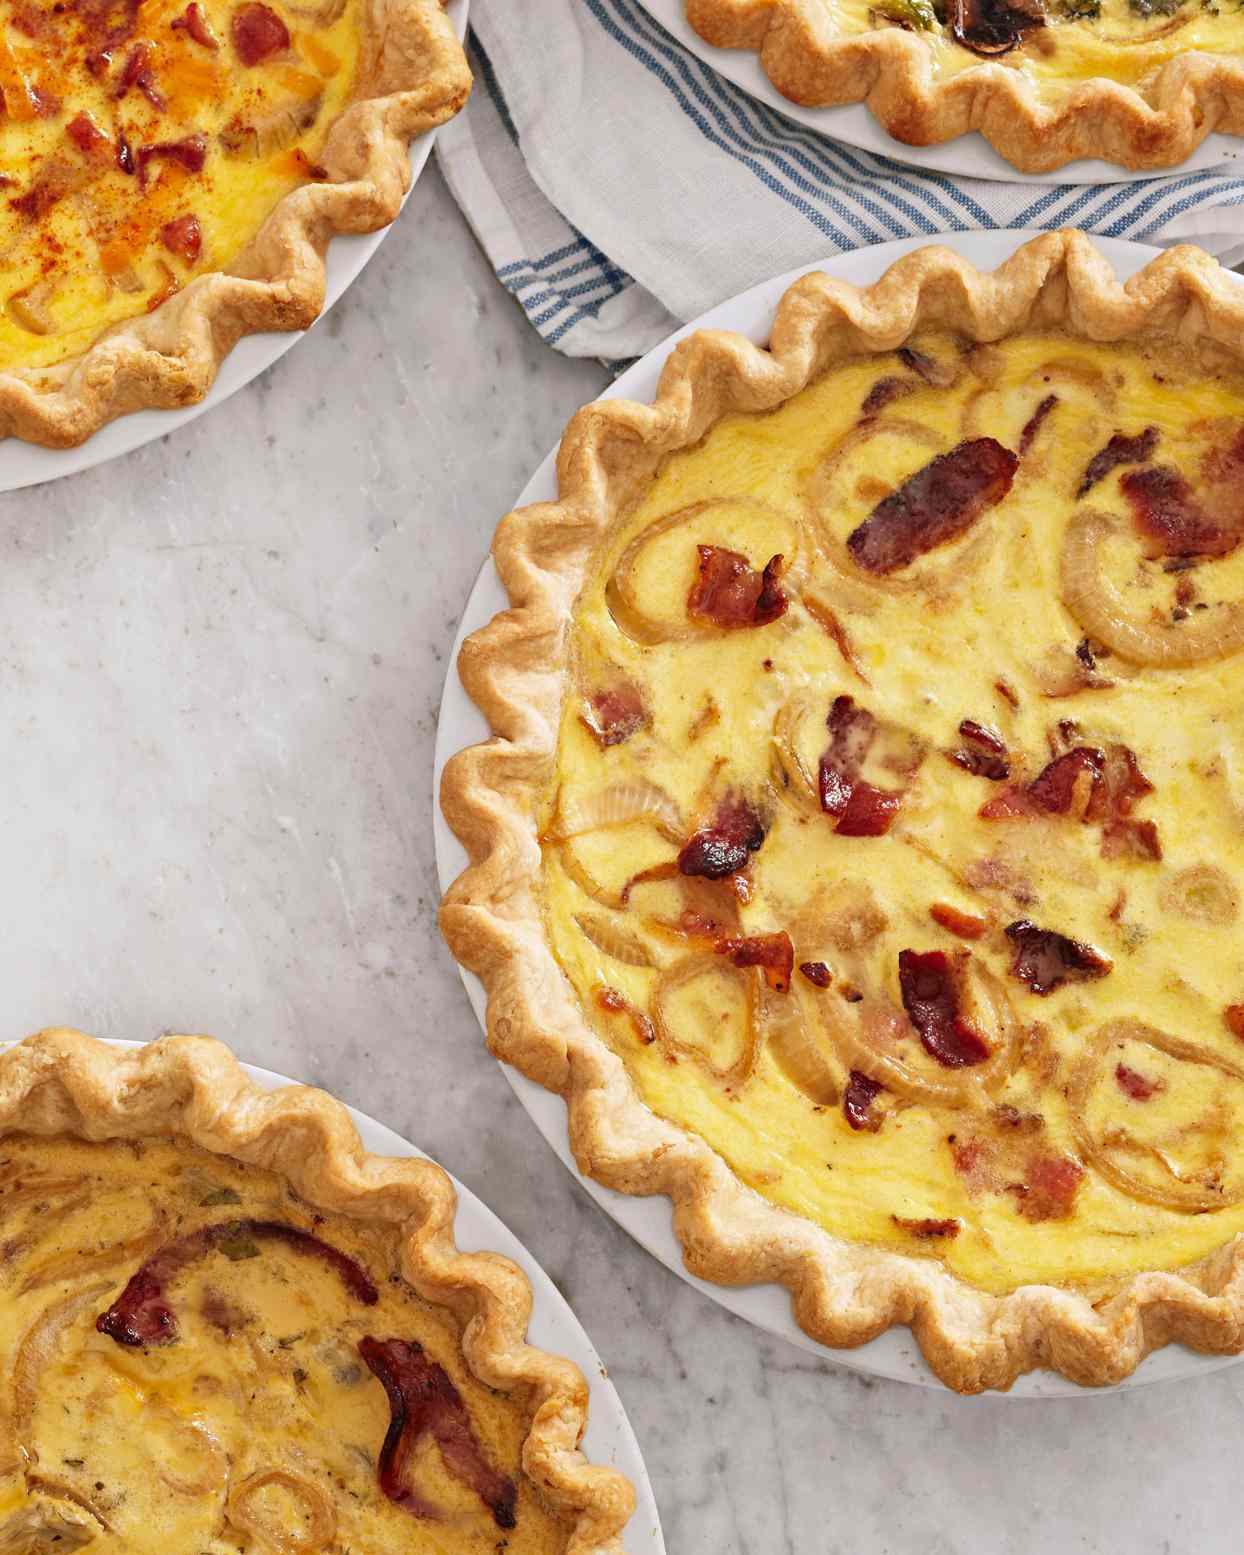 How to Make Quiche When You Need an Epic Breakfast | Better Homes & Gardens